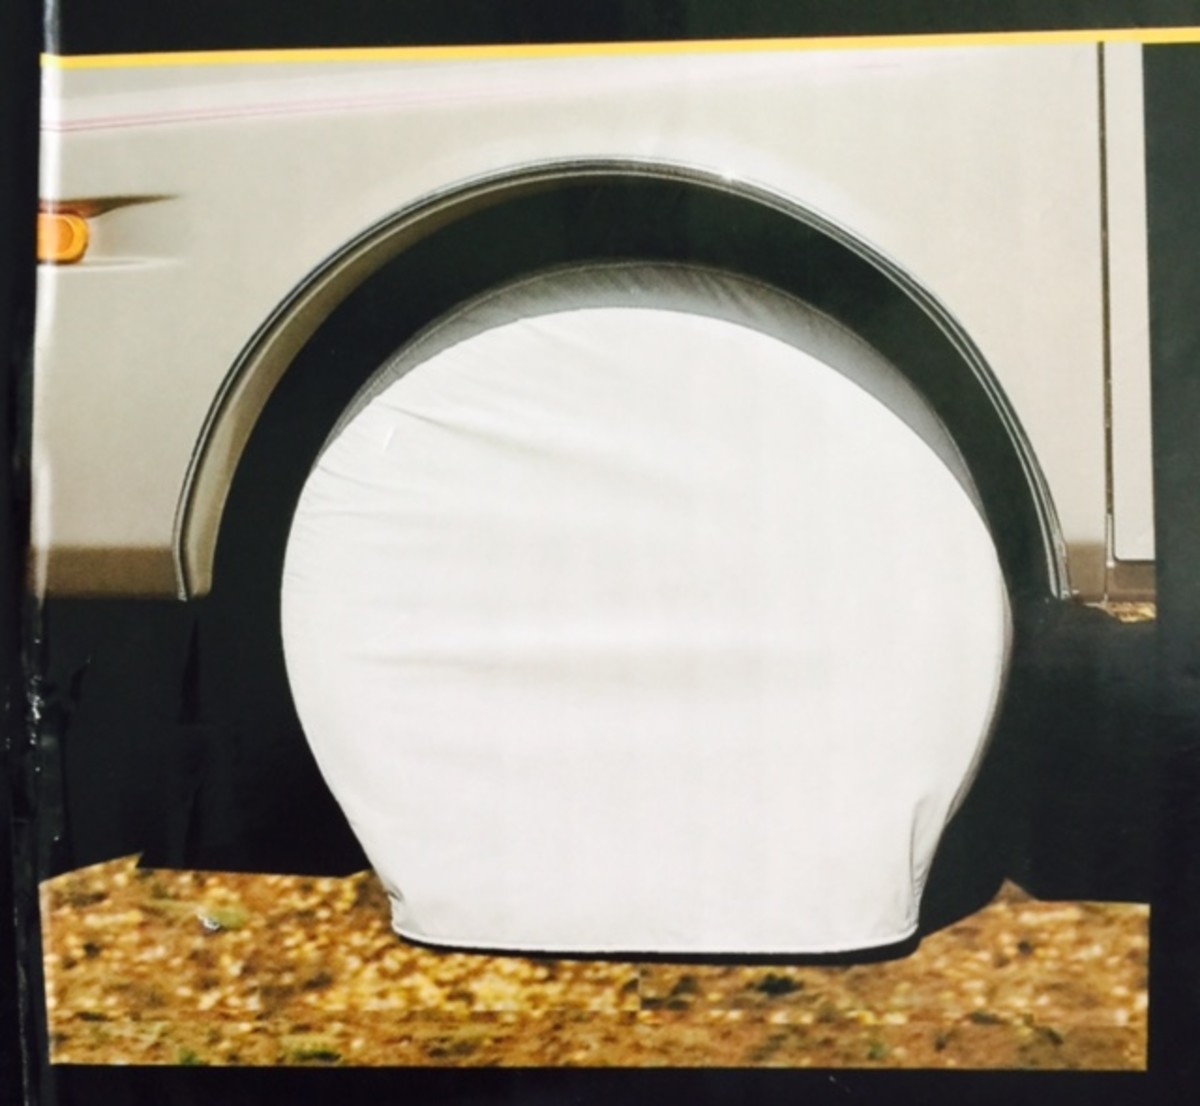 A properly installed RV tire cover should look like this, nicely fitted.